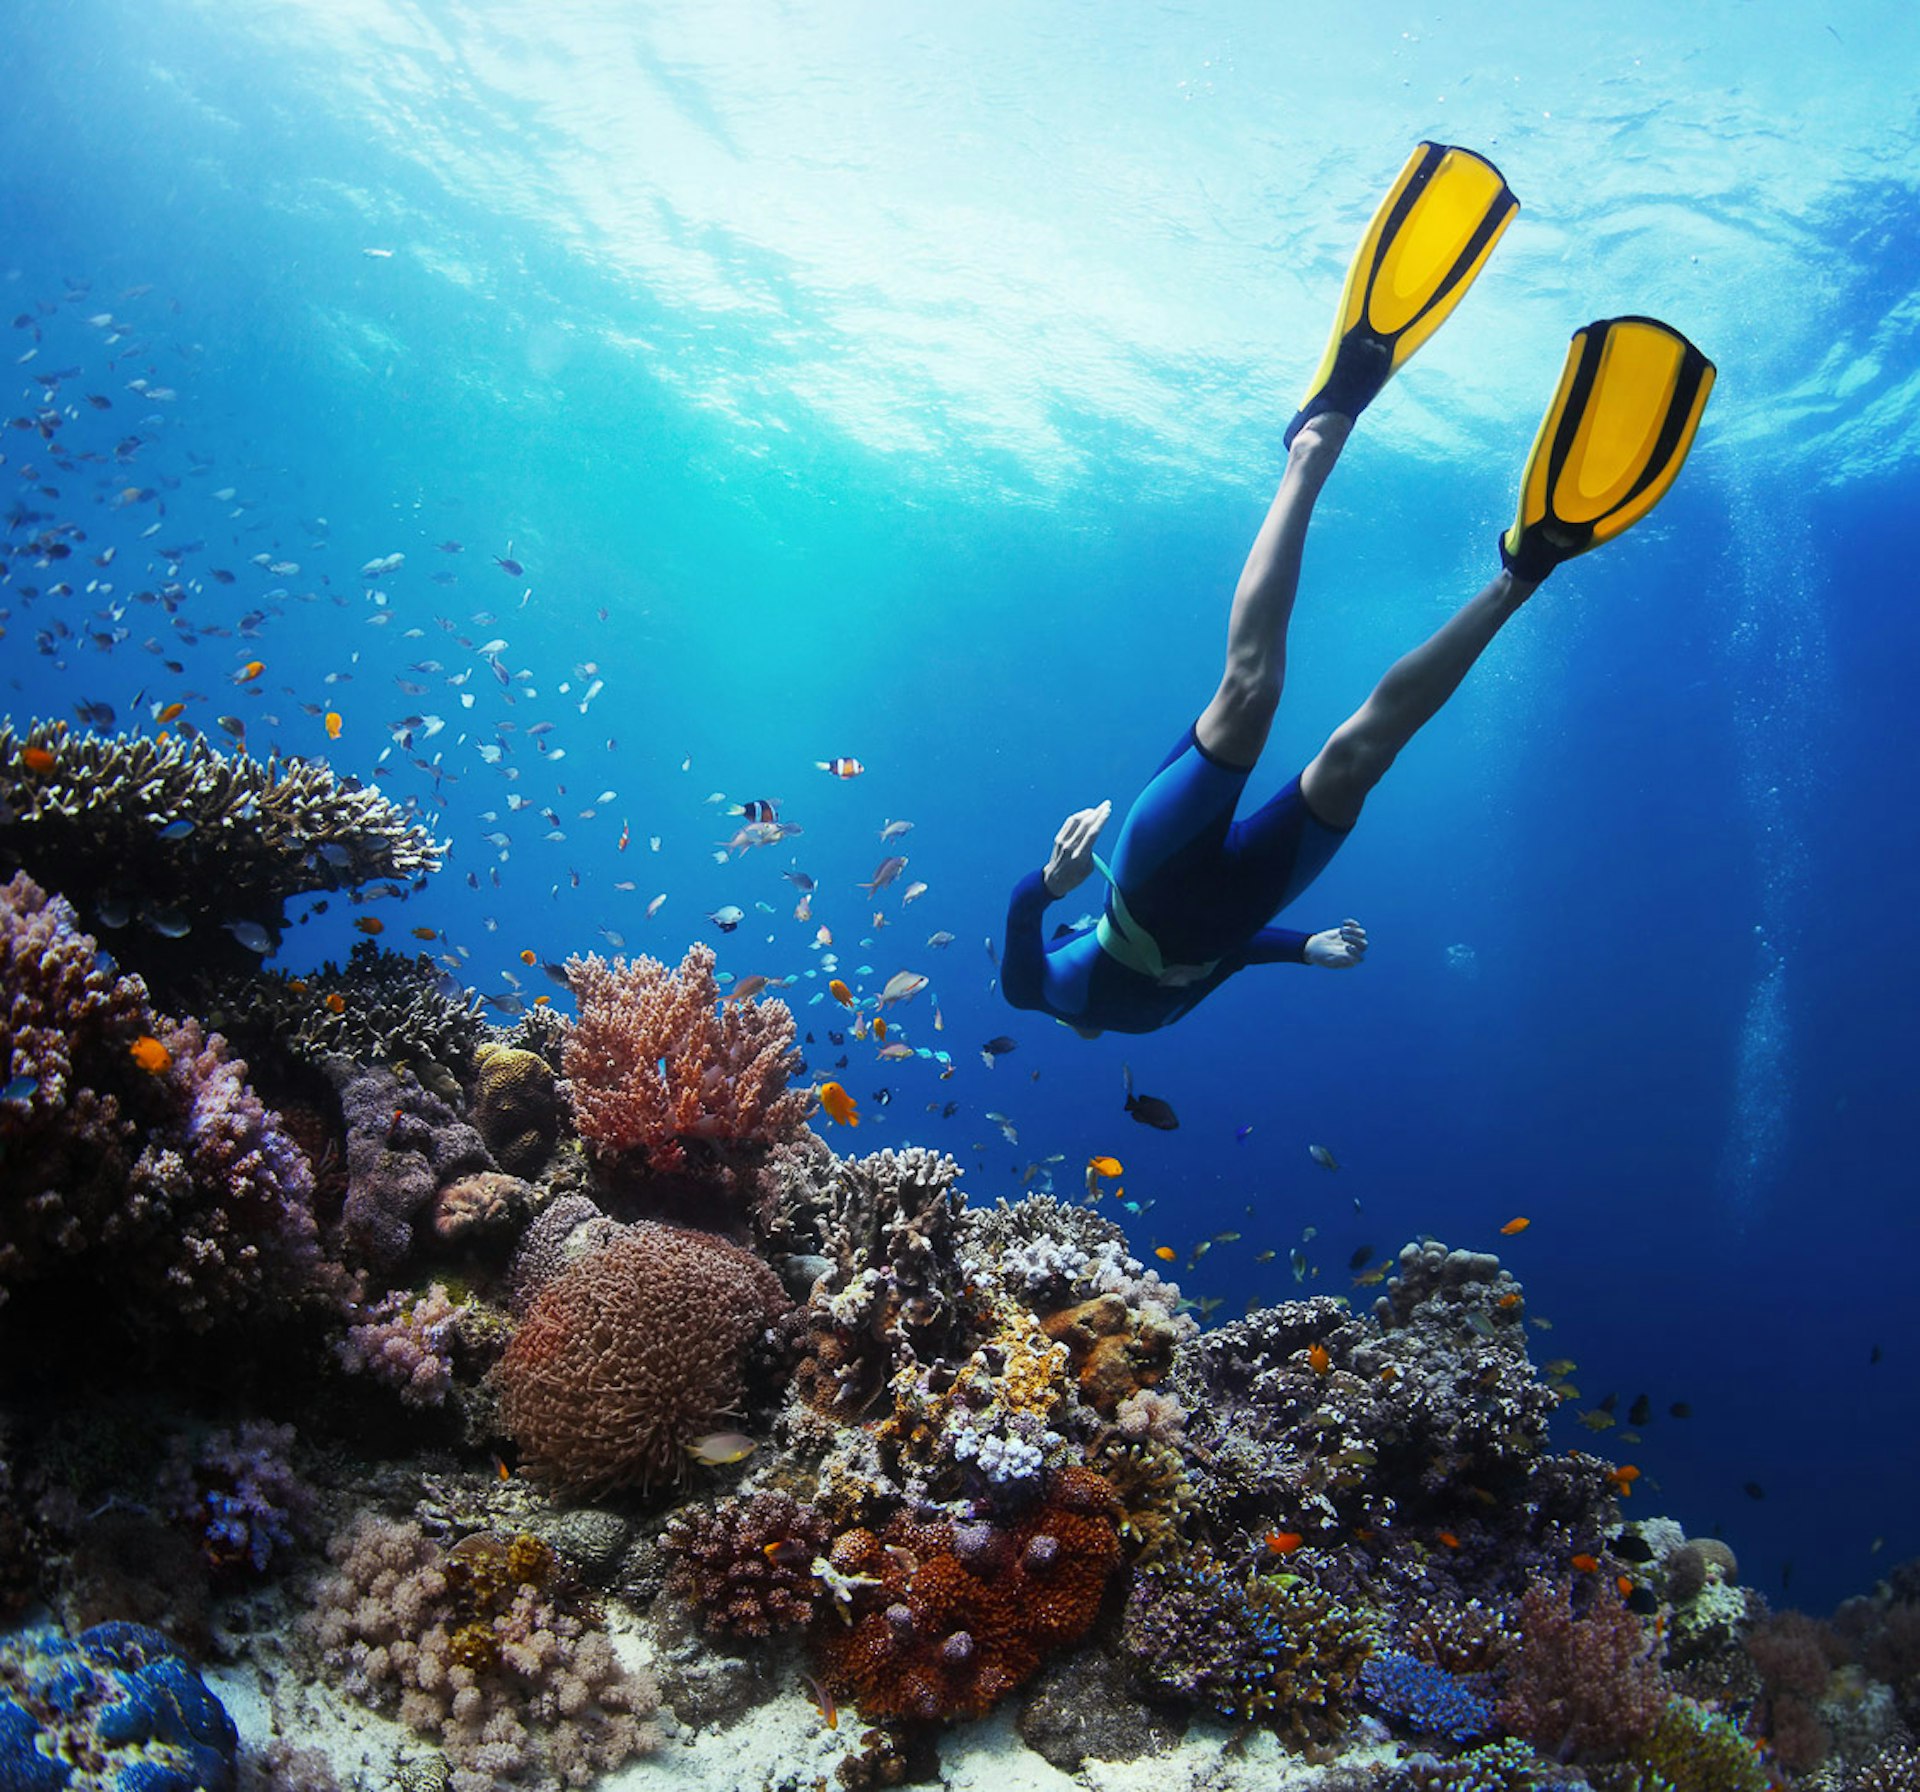 Underwater shot of a person snorkeling next to a coral reef. There is a school of fish hovering above the coral; caribbean sea turtle